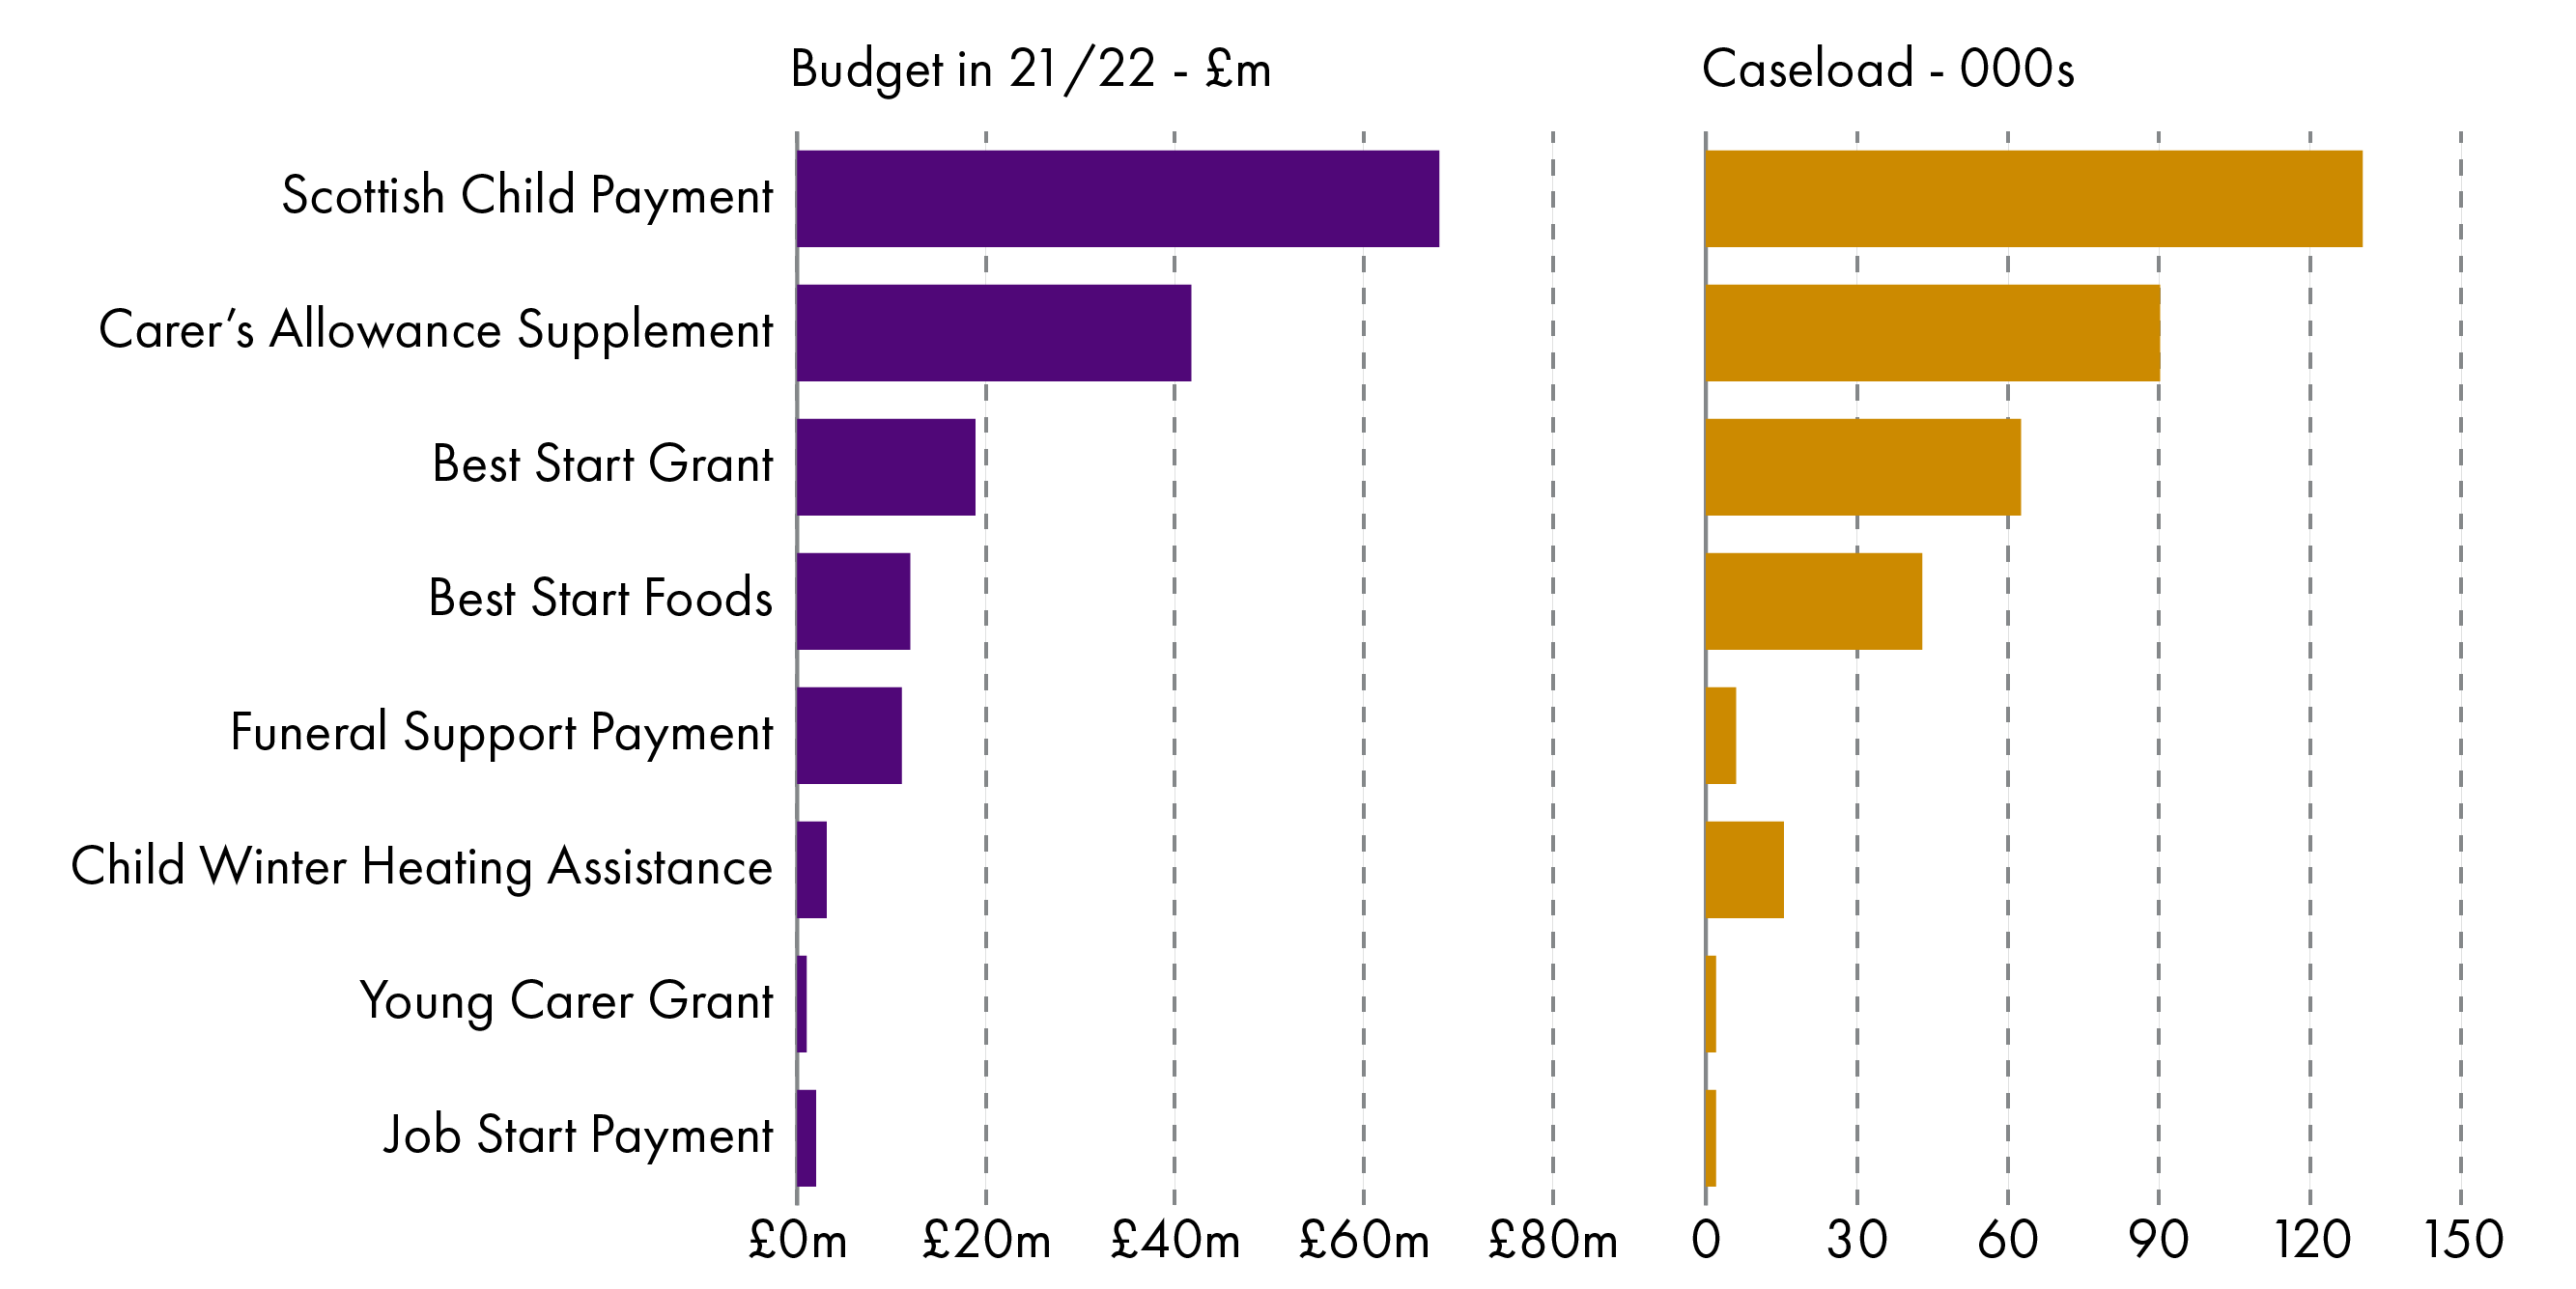 This infographic shows the 2021-22 budget and caseload for benefits in payment by May 2021 and directly administered by Social Security Scotland. The largest is the Scottish Child Payment, with a £68m budget and 130,000 children covered.